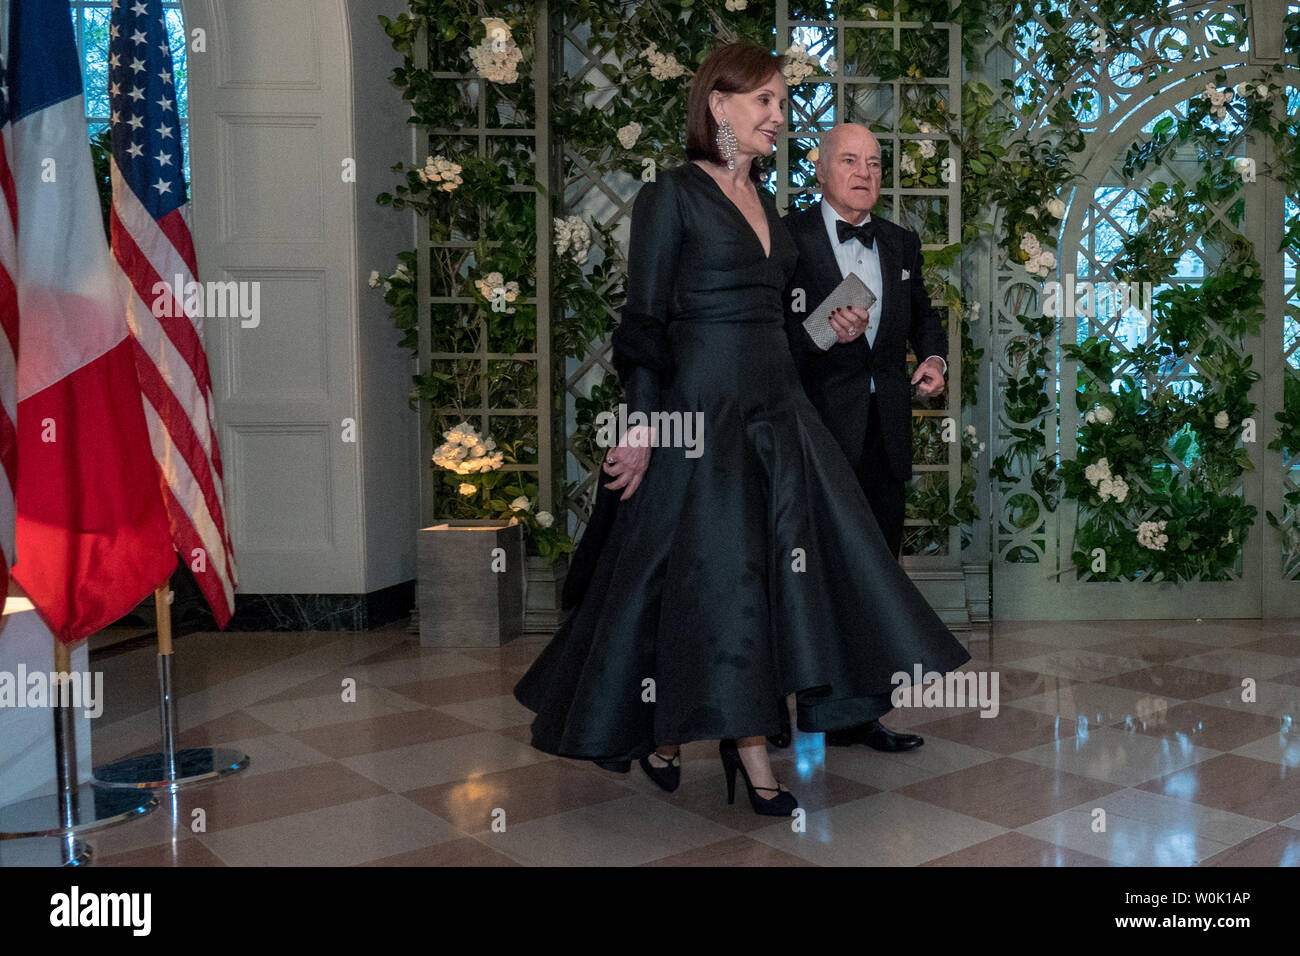 Mr. Henry Kravis and Mrs. Marie-Josée Kravis arrive for the State dinner in honor of French President Emmanuel Macron and his wife Brigitte at the White House in Washington, D.C. on April 24, 2018. Macron and Trump met earlier in the day and discussed a range of bilateral issues during Trumps first official state visit with the French president.     Photo by Ken Cedeno/UPI Stock Photo